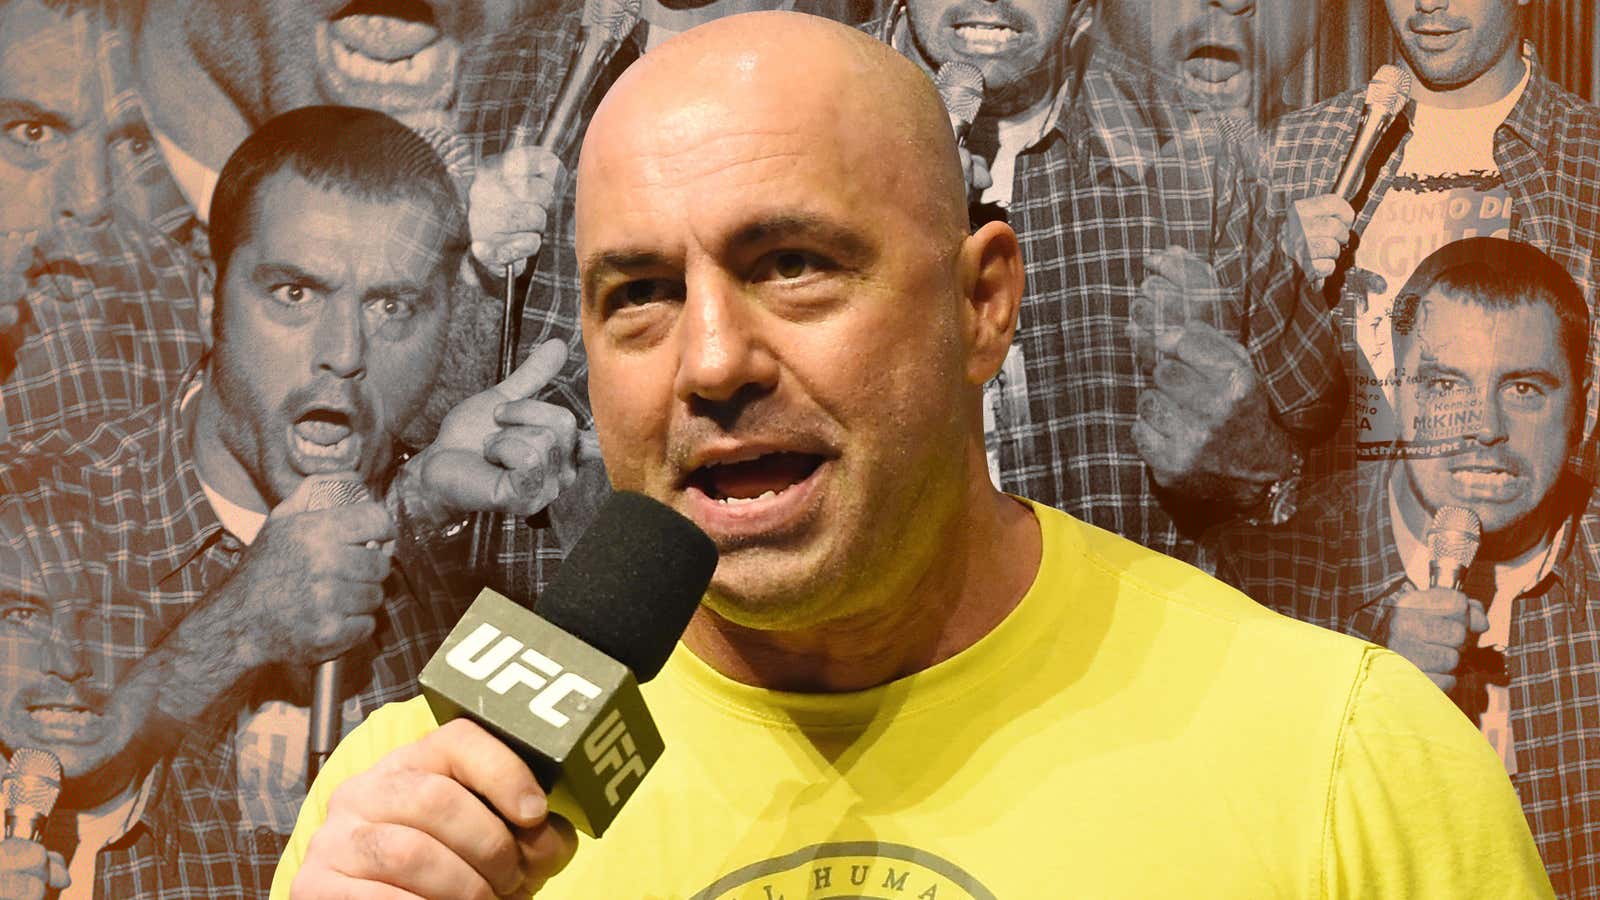 Joe Rogan (background photos: Carlo Allegri/Getty Images; foreground photo: Ethan Miller/Getty Images)